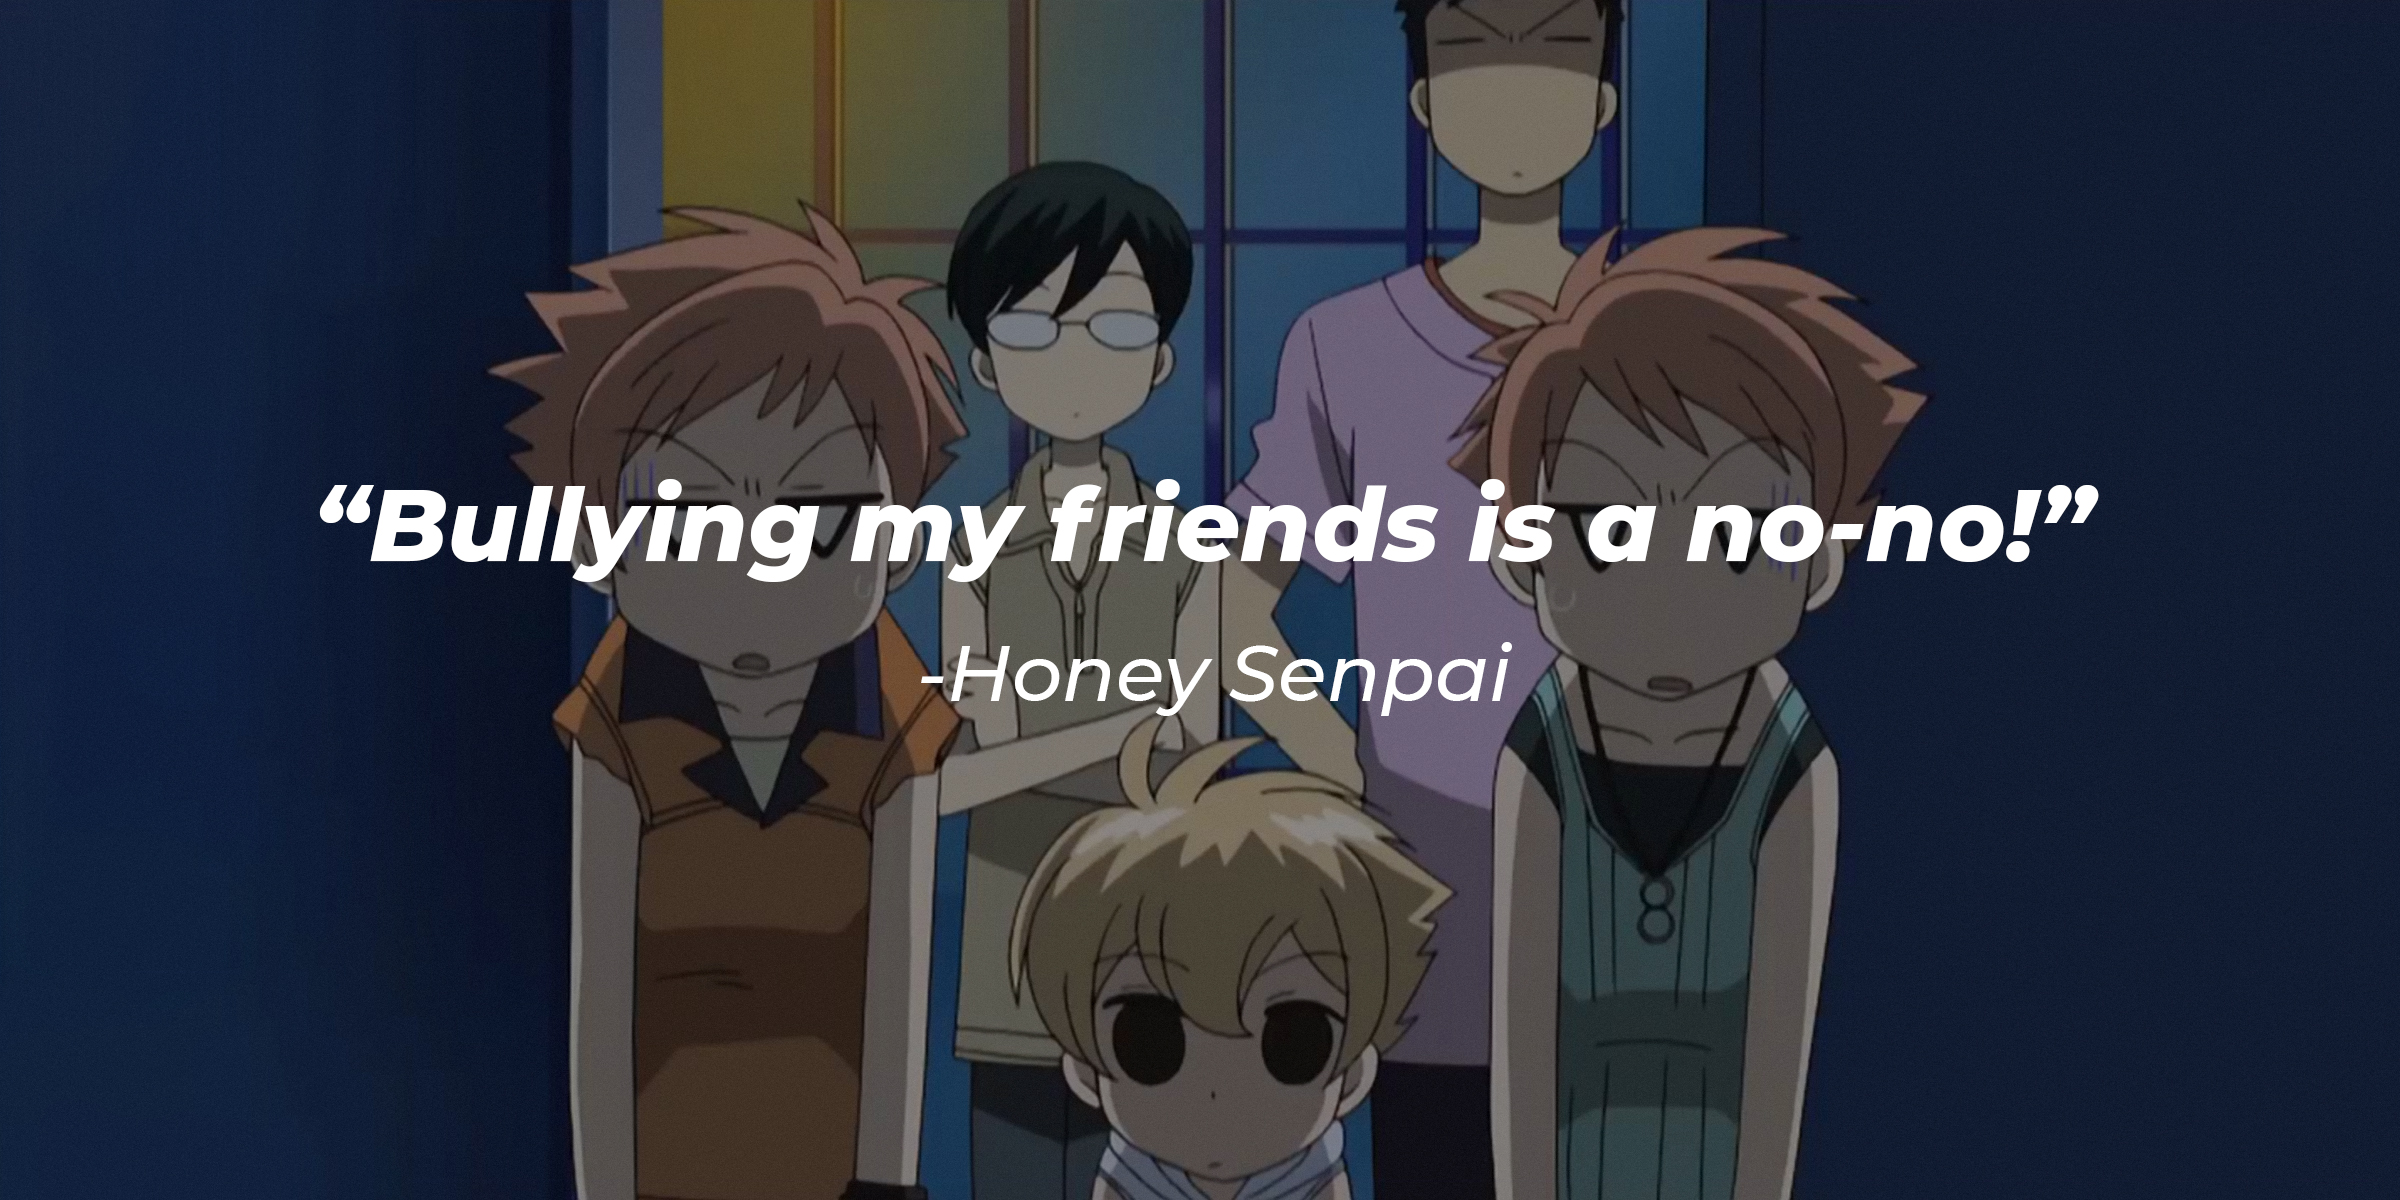 Characters from "Ouran High School Host Club with Honey Senpai in the middle with a quote by him: "Bullying my friends is a no-no!" | Source: facebook.com/funimation